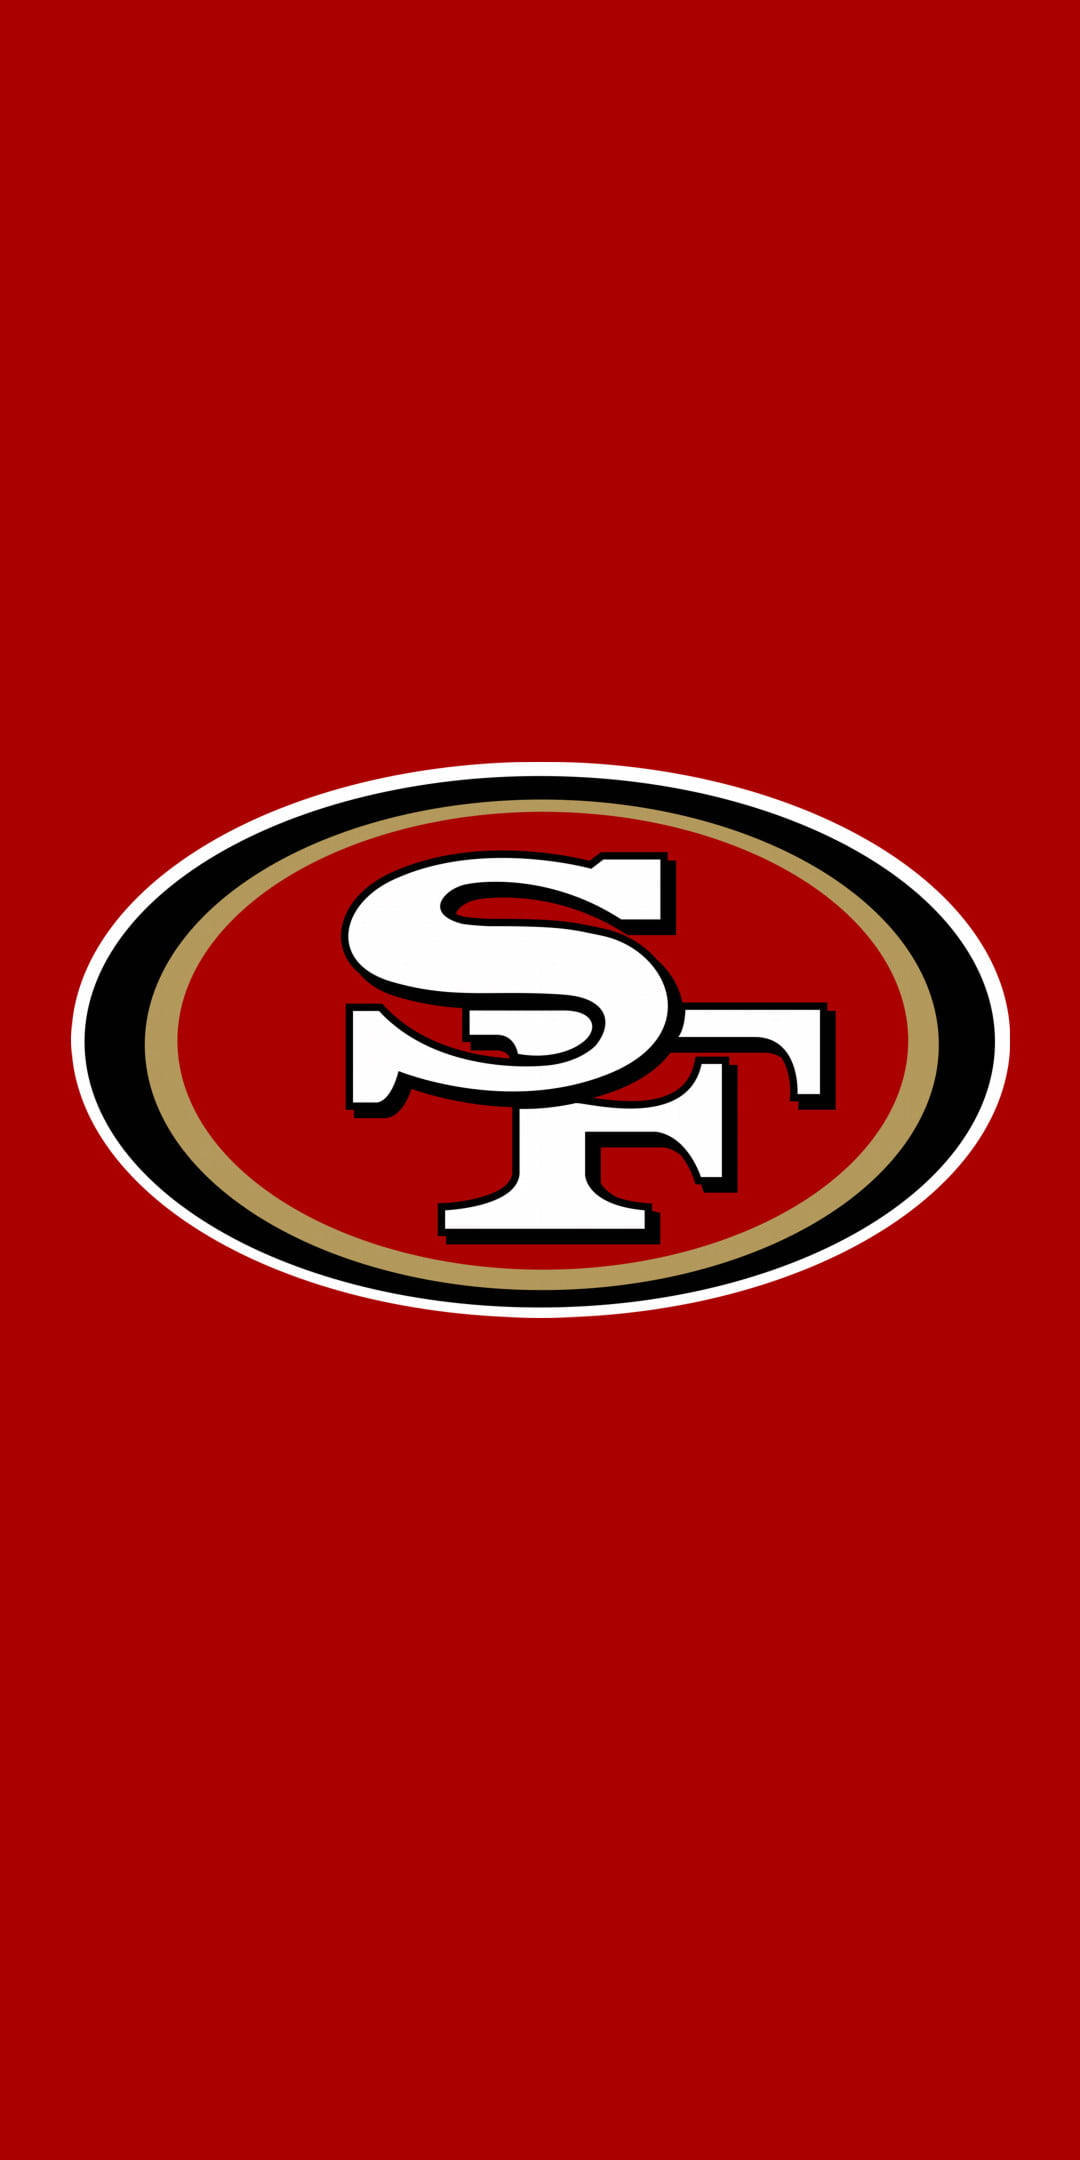 Classic Sf Logo 49ers Iphone Picture